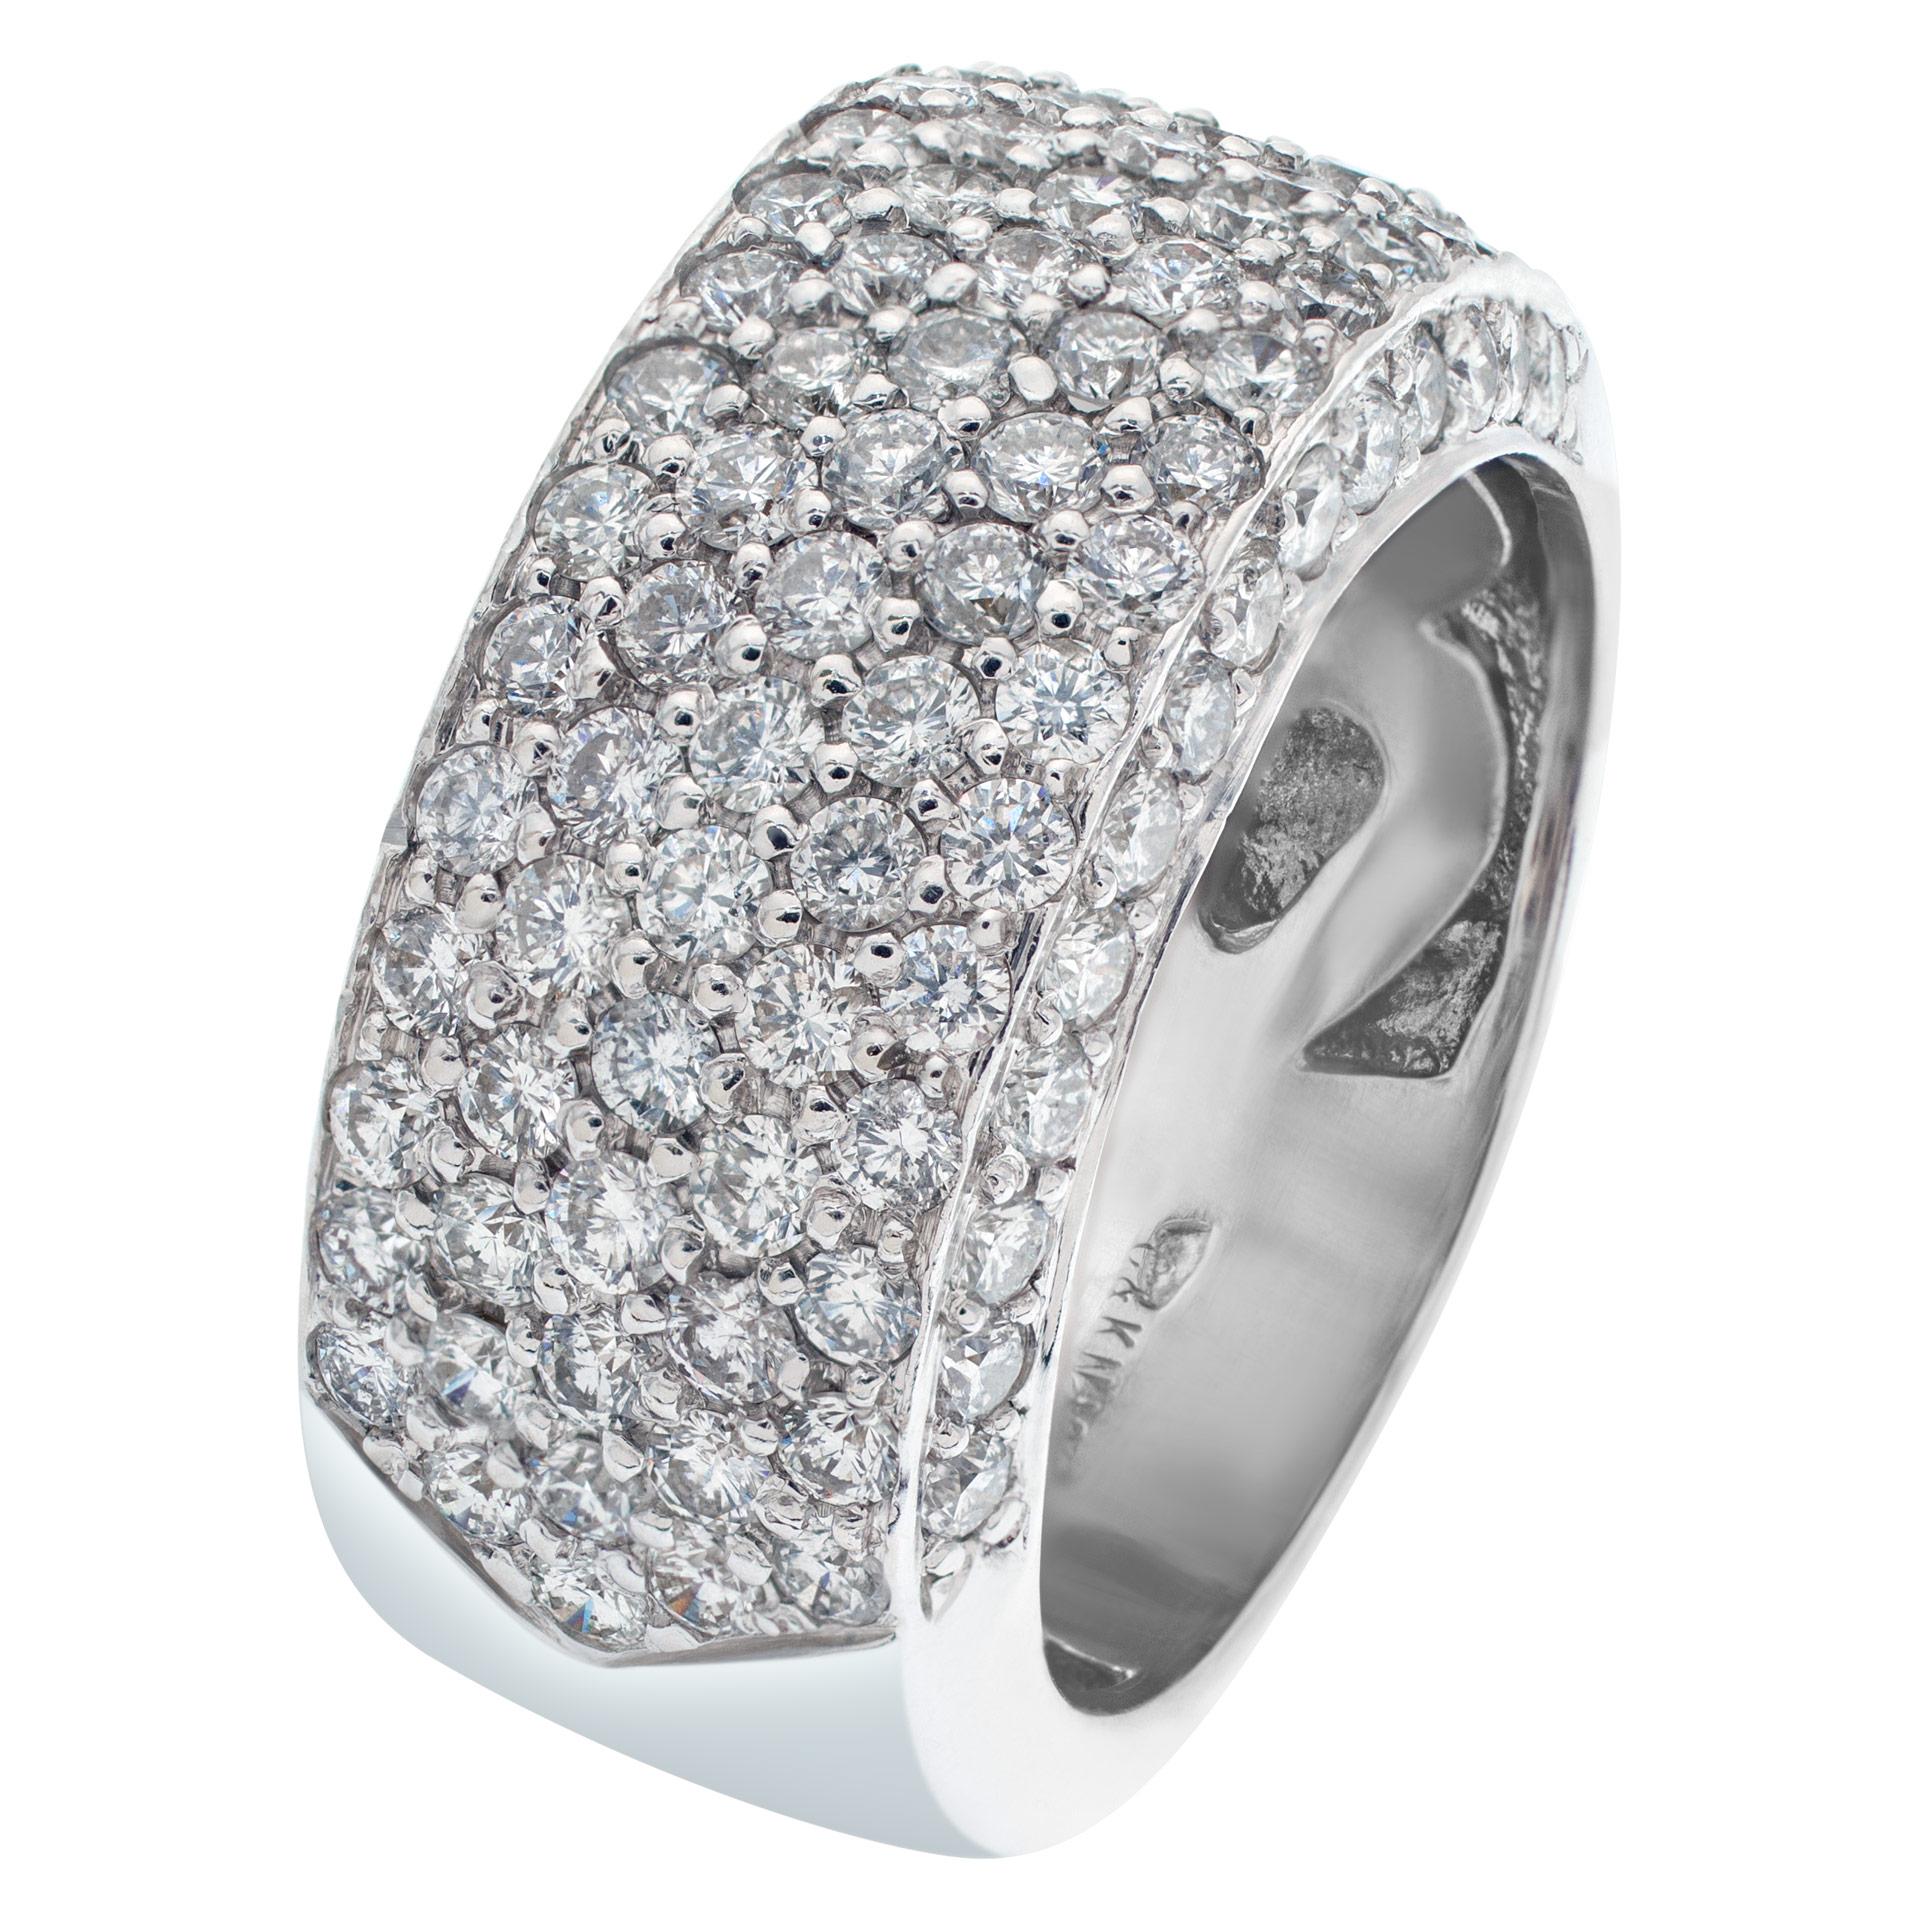 Sparkling bright micro pave diamond ring with approxikmately 1.5 carats in round cut brilliant diamonds set in a wide band of 18k white gold. Ring width 9.8mm. Size: 6.5.  This Diamond ring is currently size 6.5 and some items can be sized up or